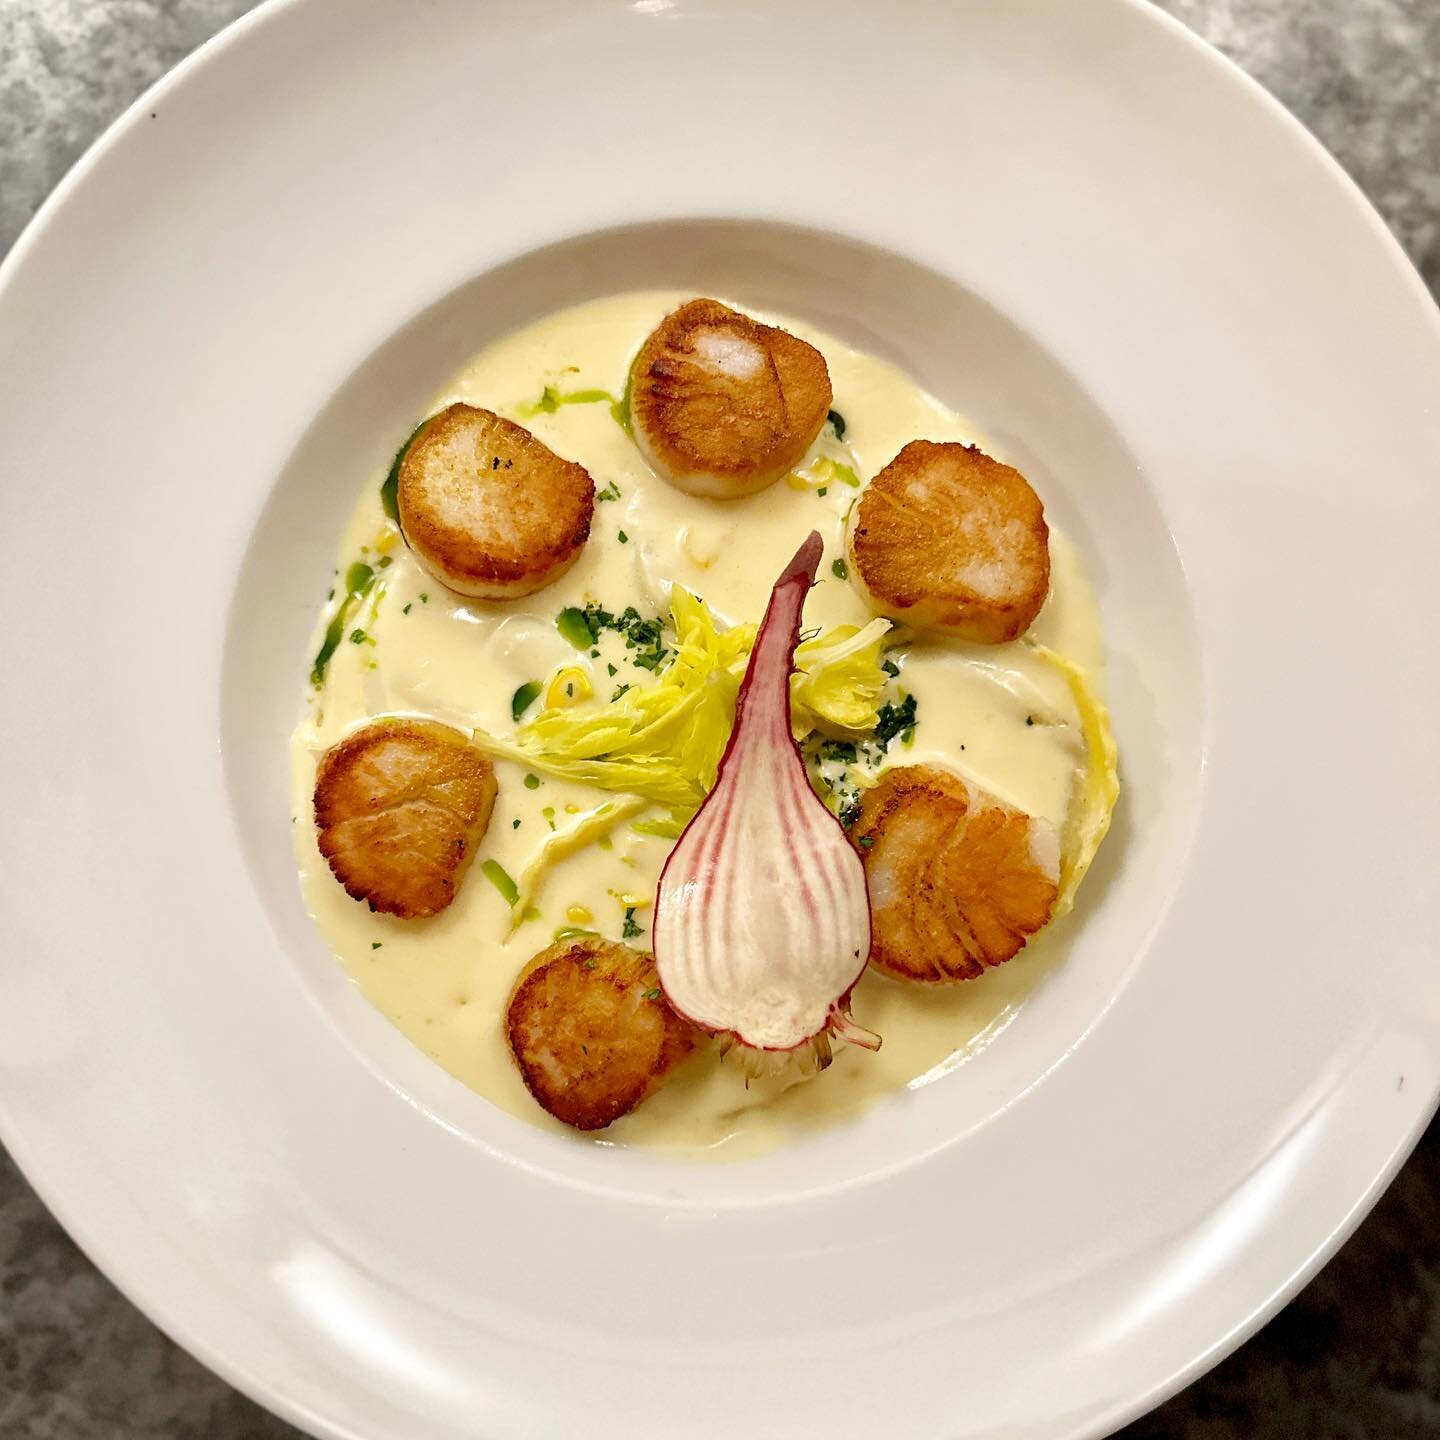 Special Tonight! 💥 @fvmidnightourscallops over grilled vegetable ravioli + sweet corn velout&eacute; - OUTSTANDING! ✨

Join us tonight starting at 5pm 🥂